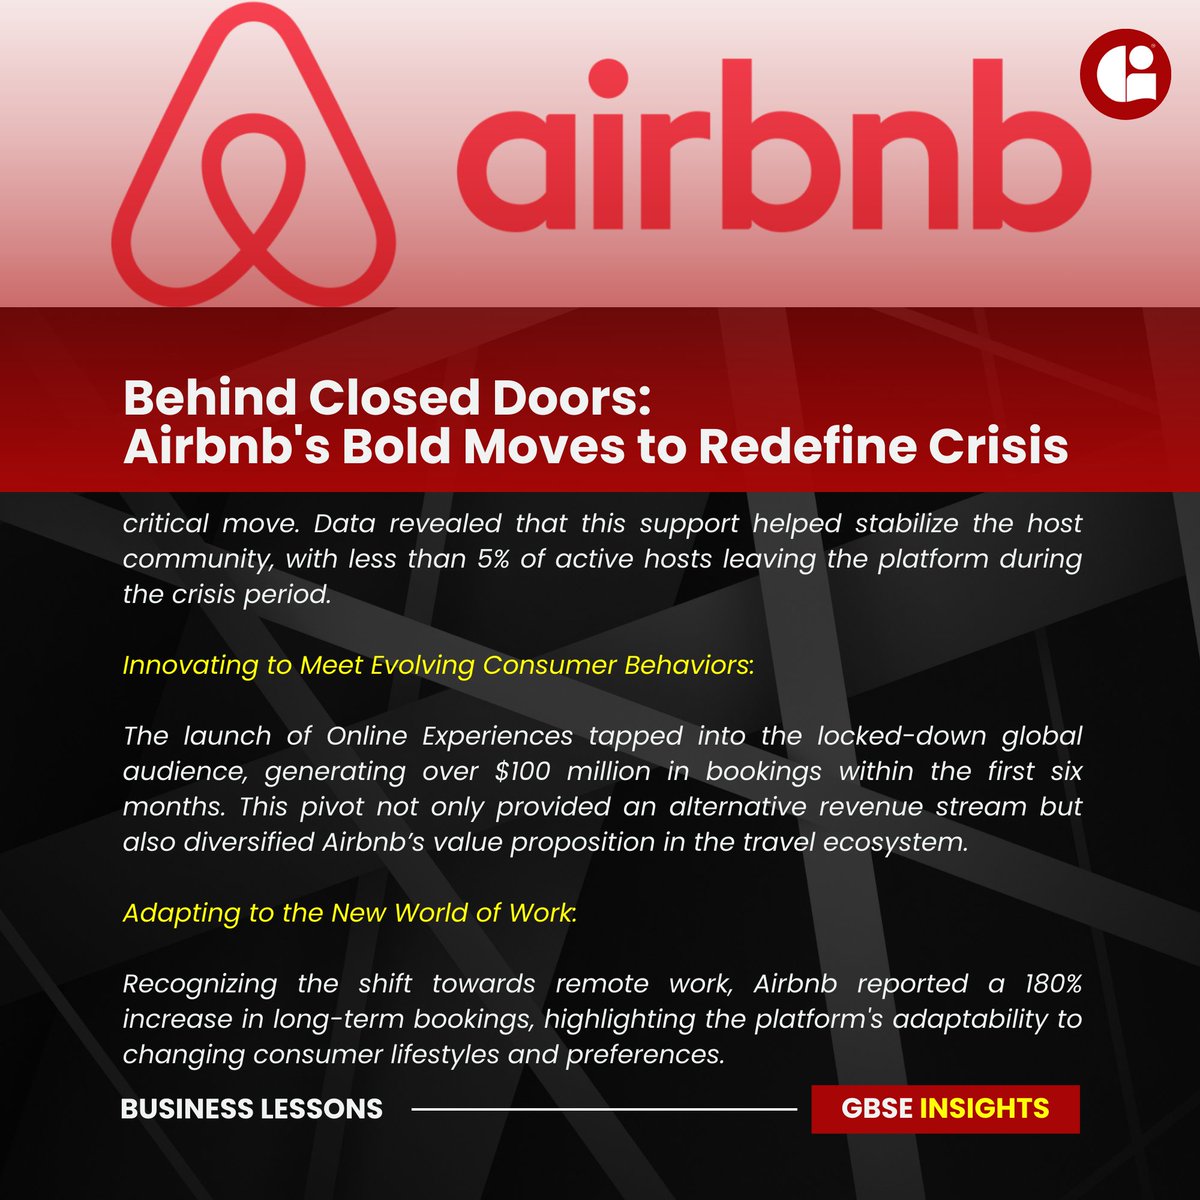 The pandemic presented a checkmate scenario; Airbnb rewrote the rules of the game. Learn how with GBSE's in-depth exploration into the moves that transformed a crisis into a gateway for growth. #MarketReinvention #AdaptiveStrategy #GBSEDeepDive